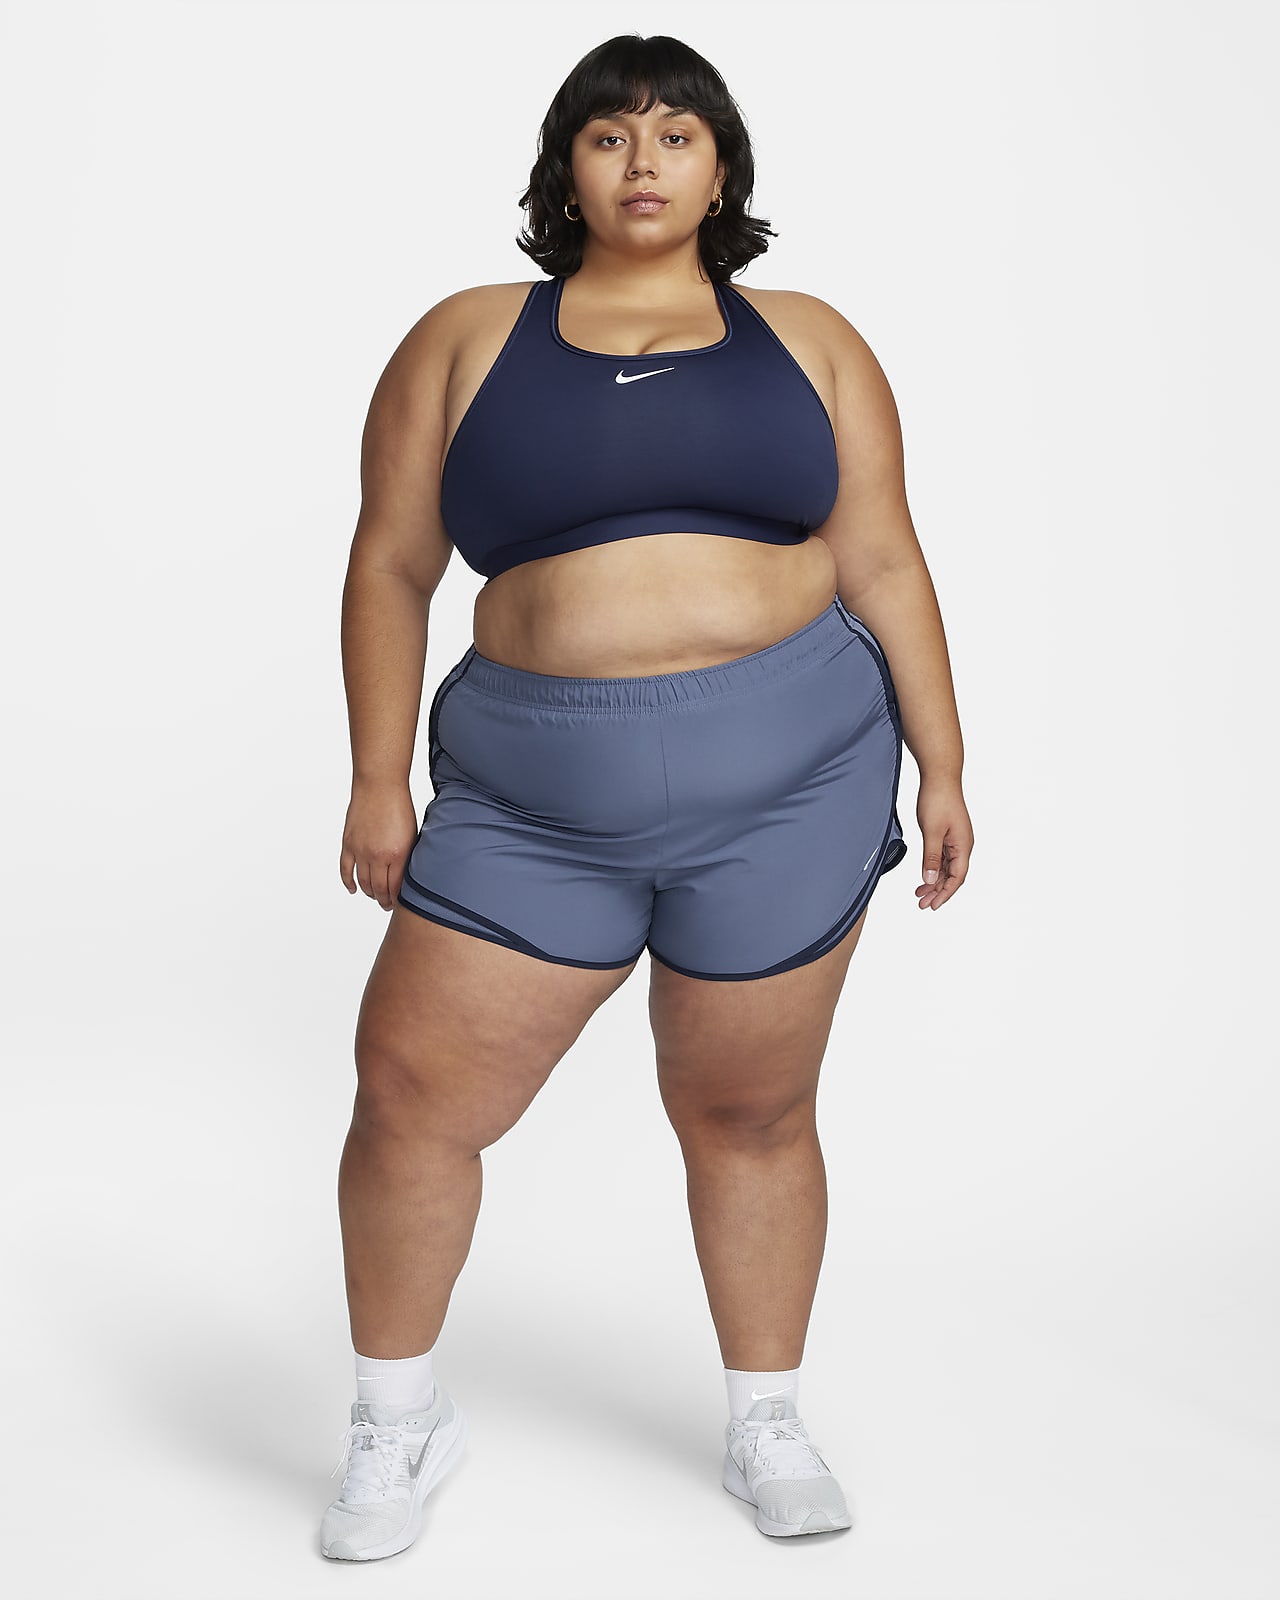 Nike released a special size Women's Plus Size for chubby ladies -  GIGAZINE